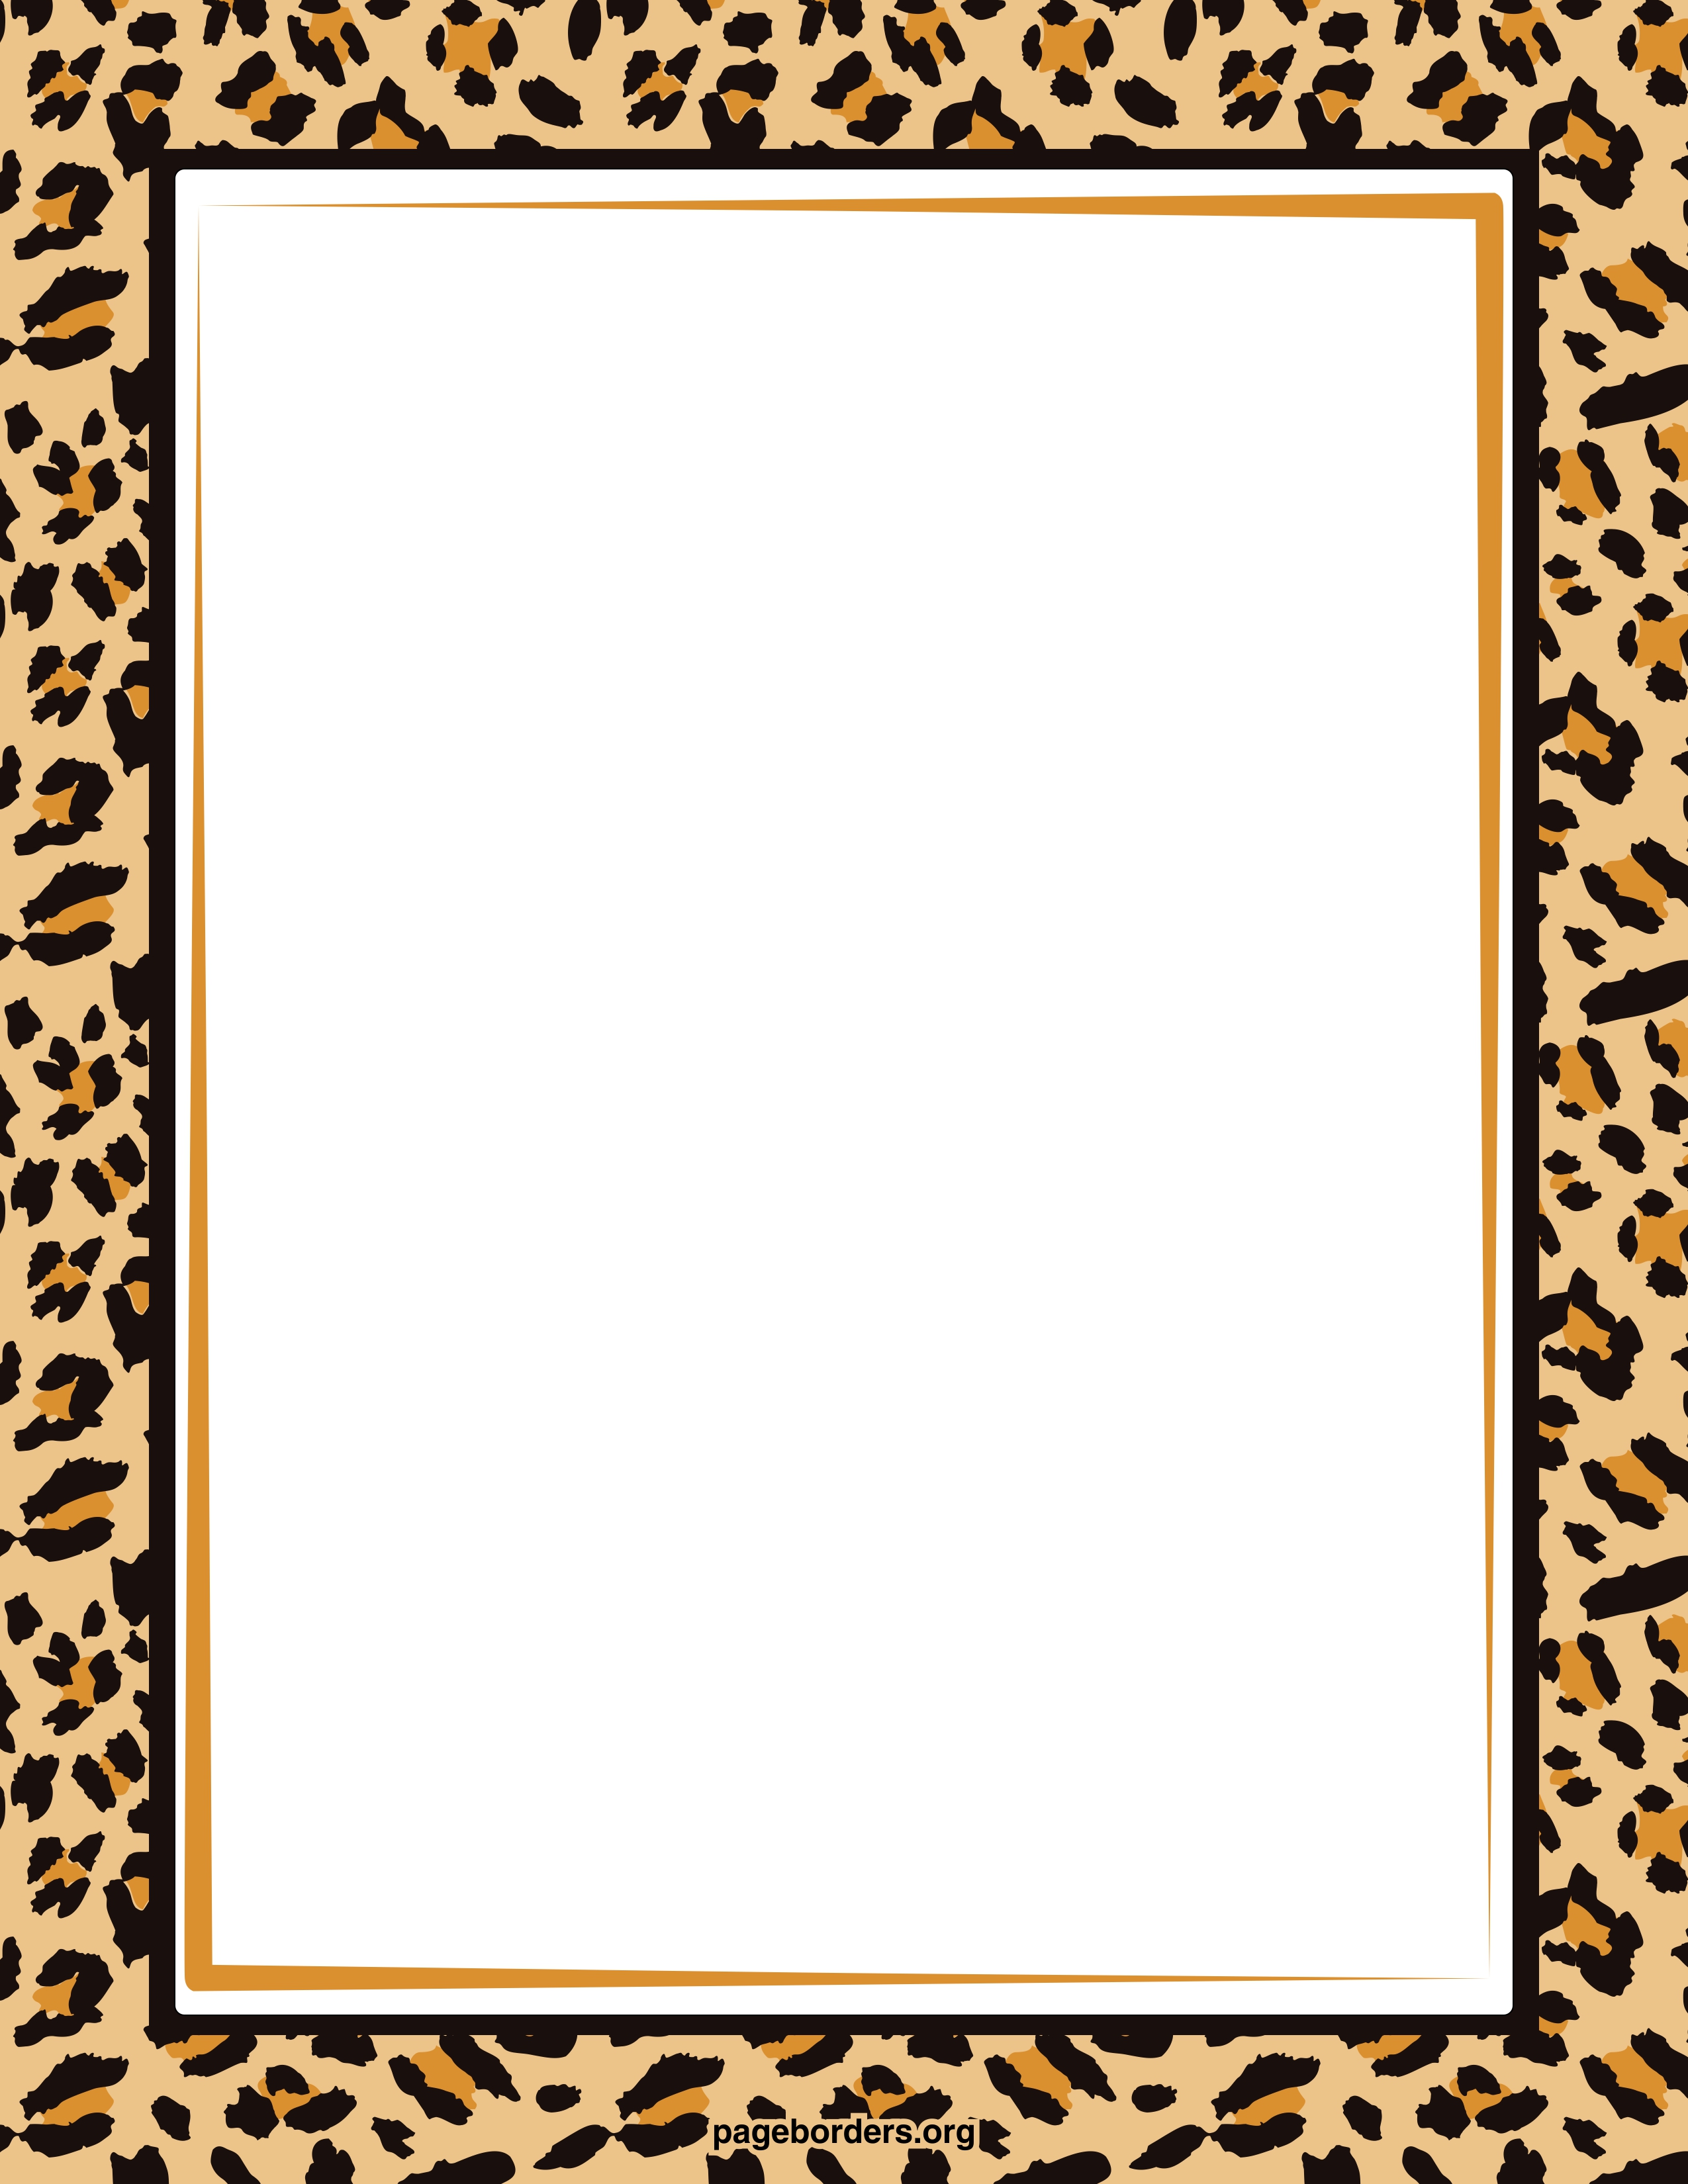 Free Pattern Borders Clip Art Page Borders and Vector Graphics